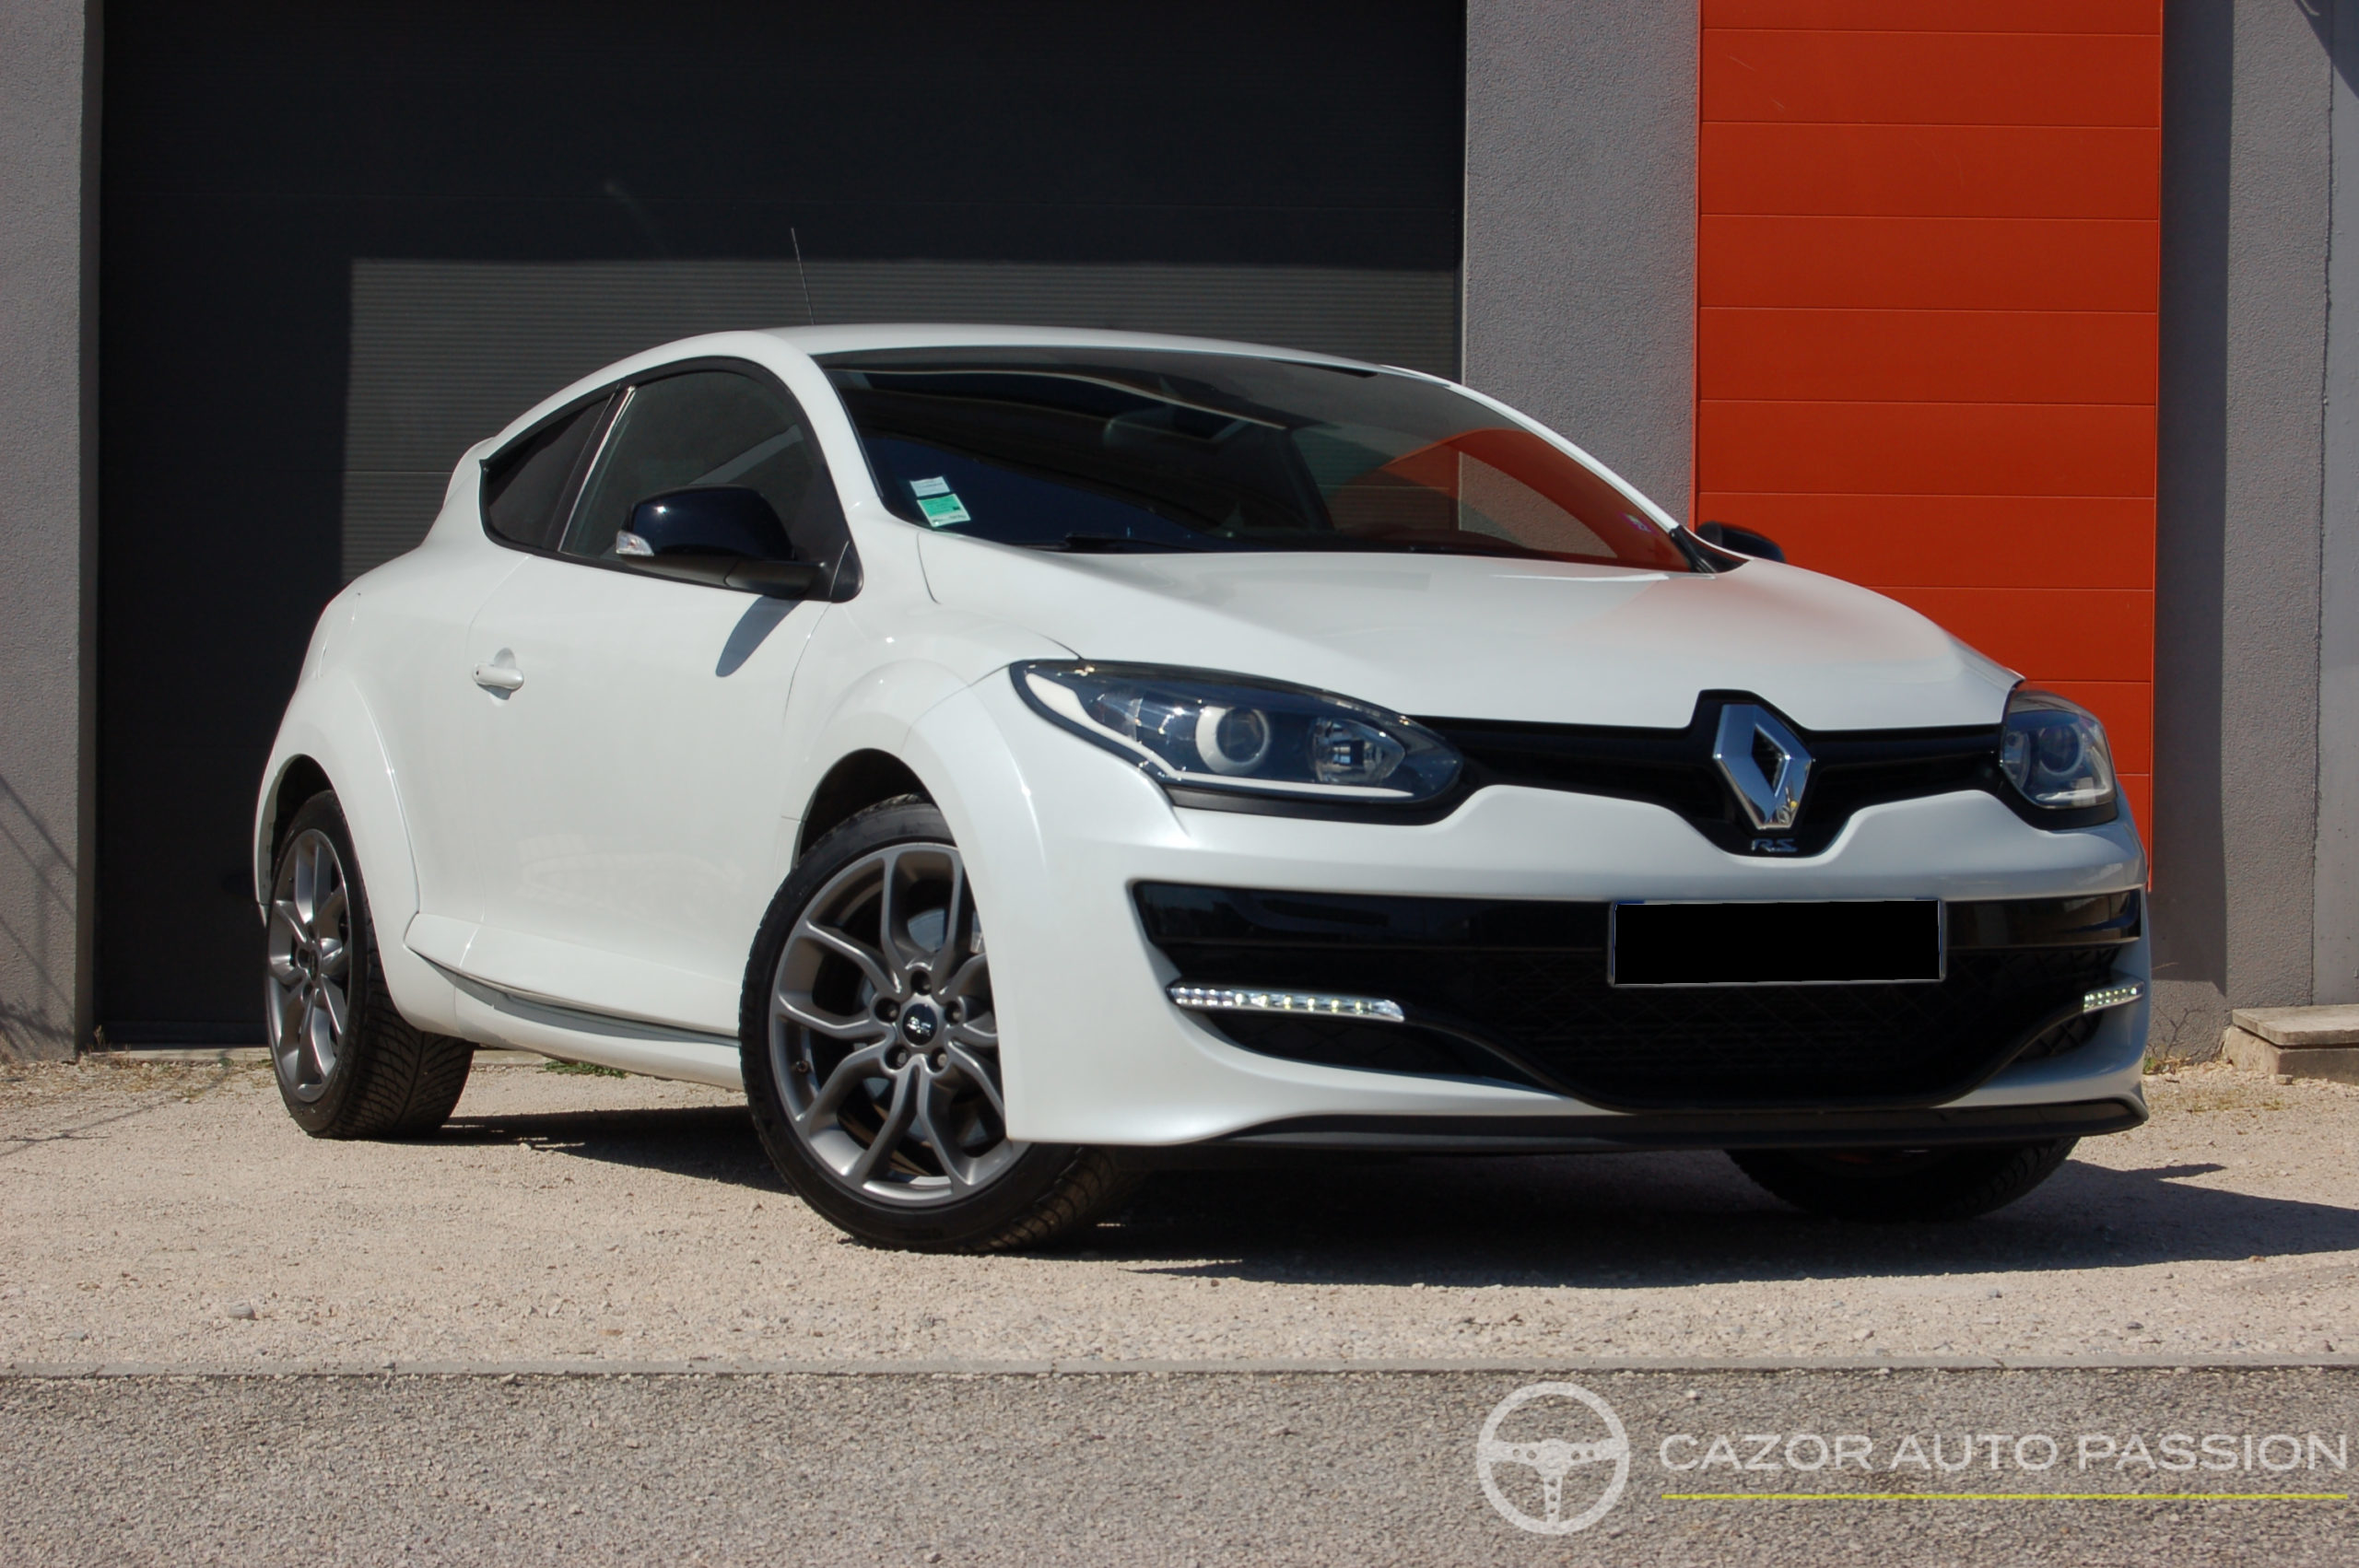 Renault Mégane 3 RS 265ch Start and Stop - Cazor Auto Passion